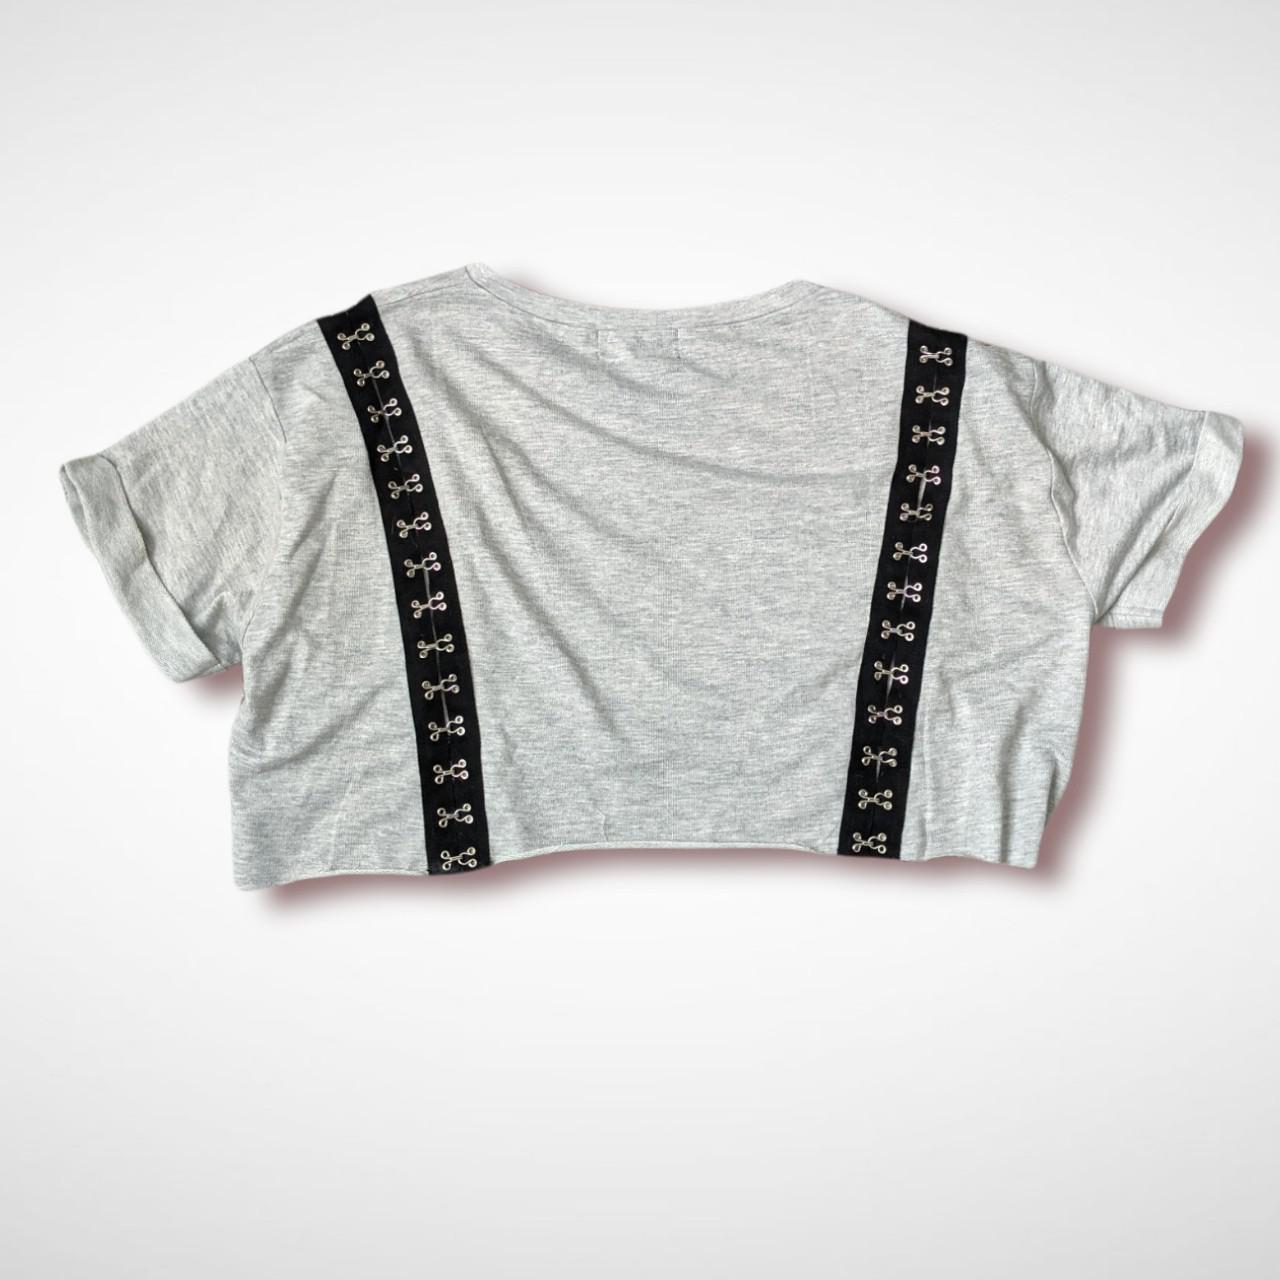 Product Image 1 - Grey Wet Seal Cropped Top

-No